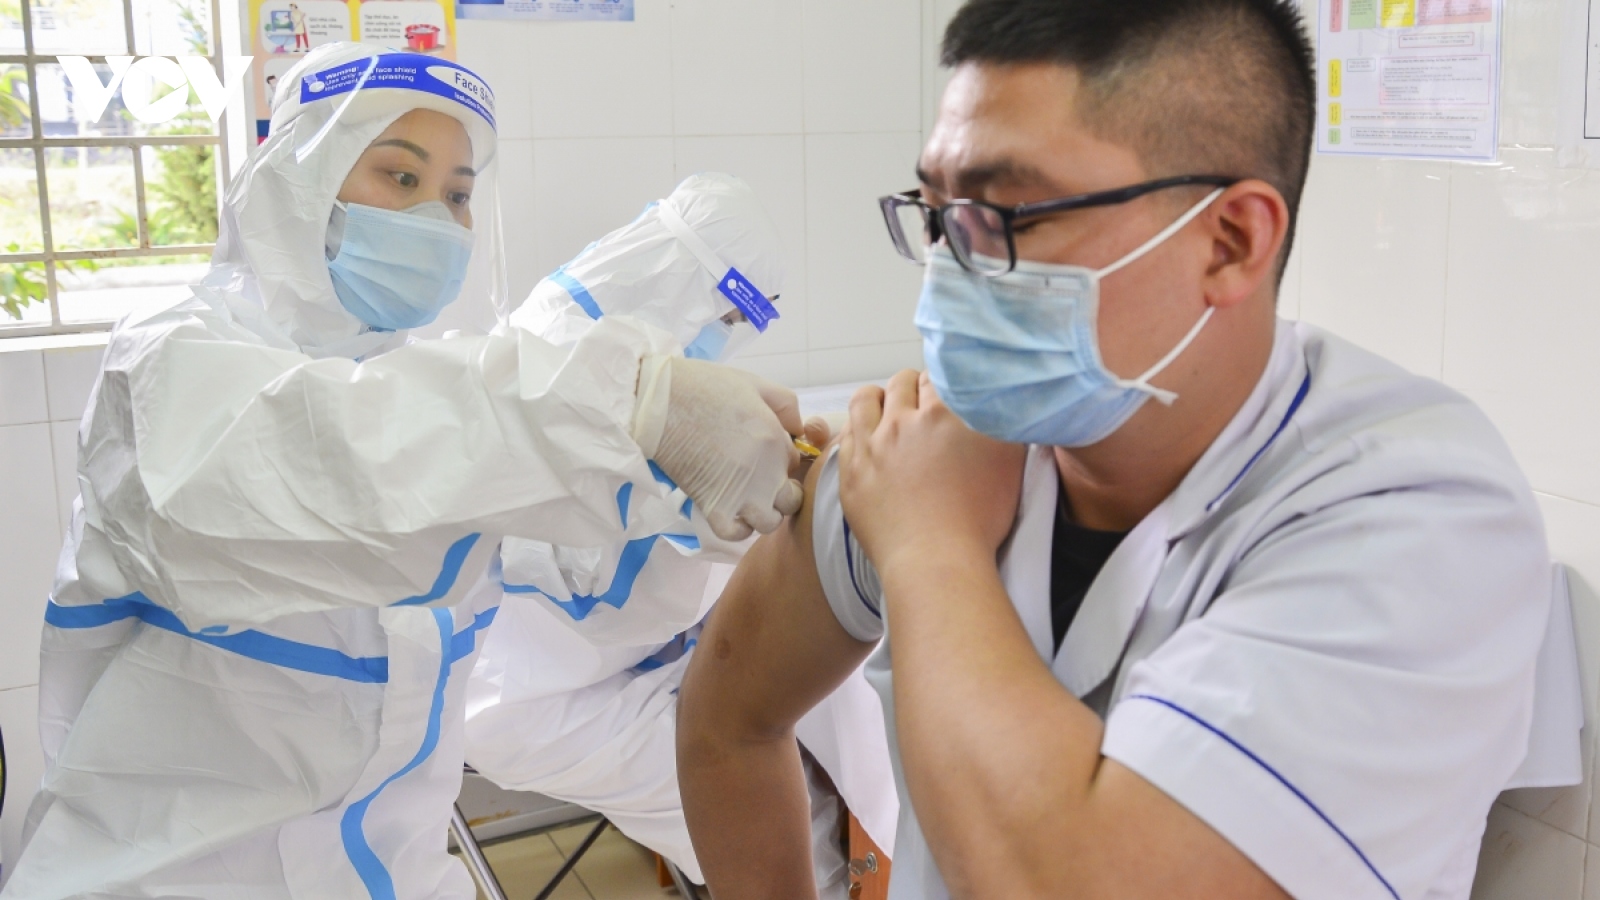 More than 58,000 Vietnamese people vaccinated against SARS-CoV-2